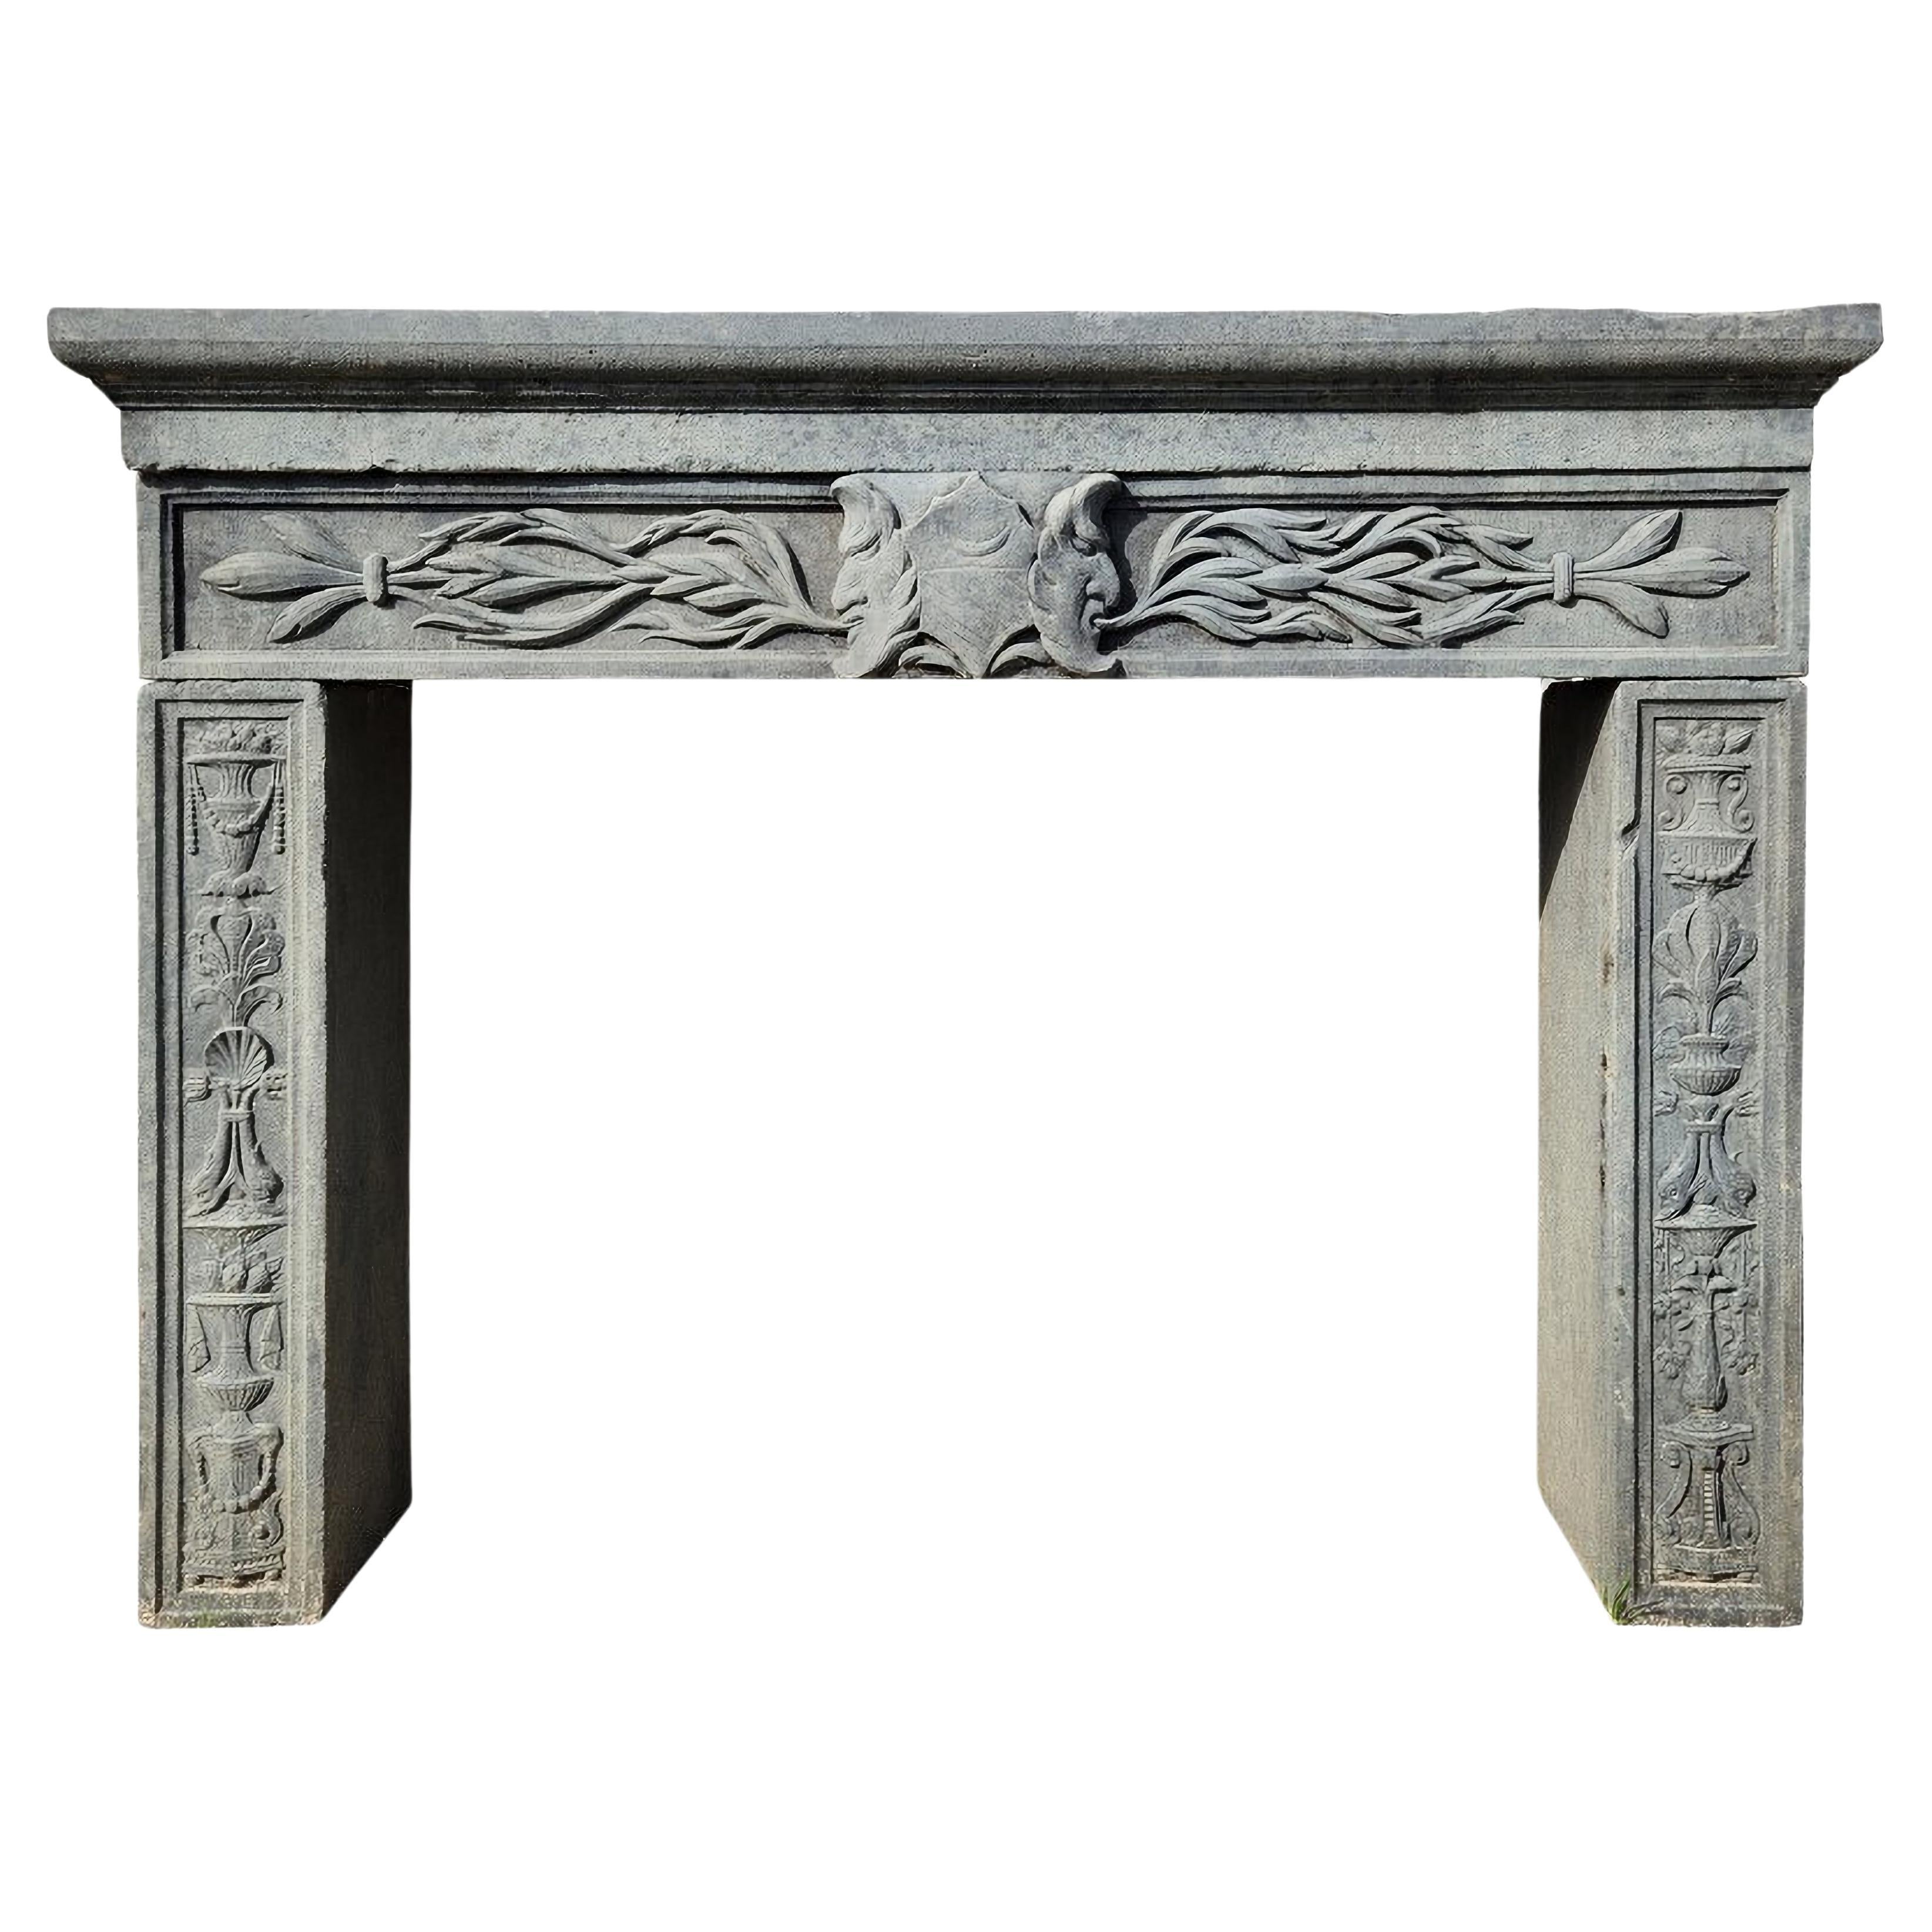 ANTIQUE TUSCAN PIETRA SERENA FIREPLACE 20th Century For Sale